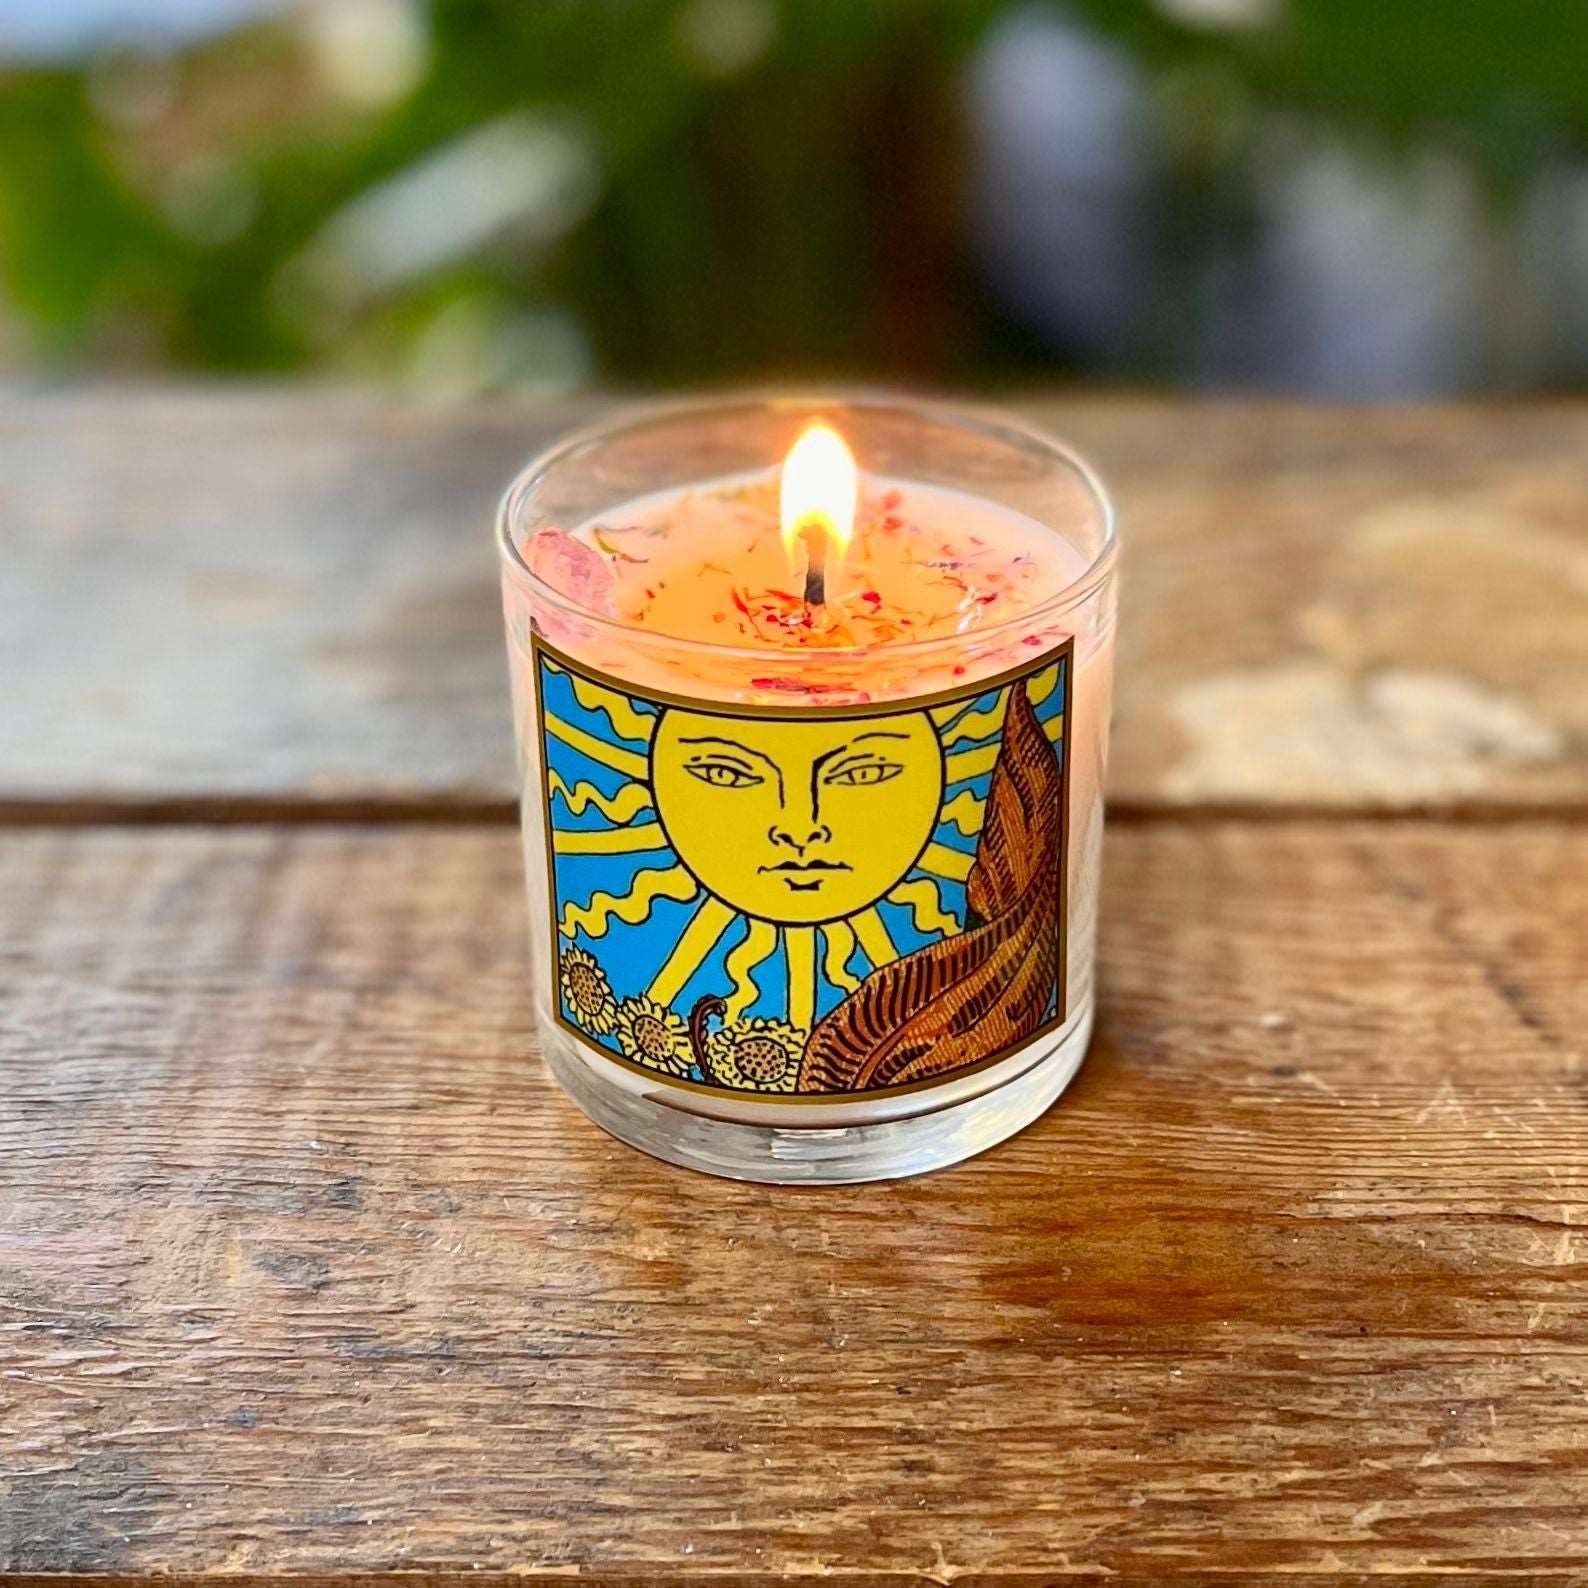 6 oz Natural GMM-Free Soy Wax The Sun Tarot Candle for Positivity, Radiance, and Aromatherapy with Organic Orange, Bergamot, Grapefruit Essential Oils and Amethyst Crystal